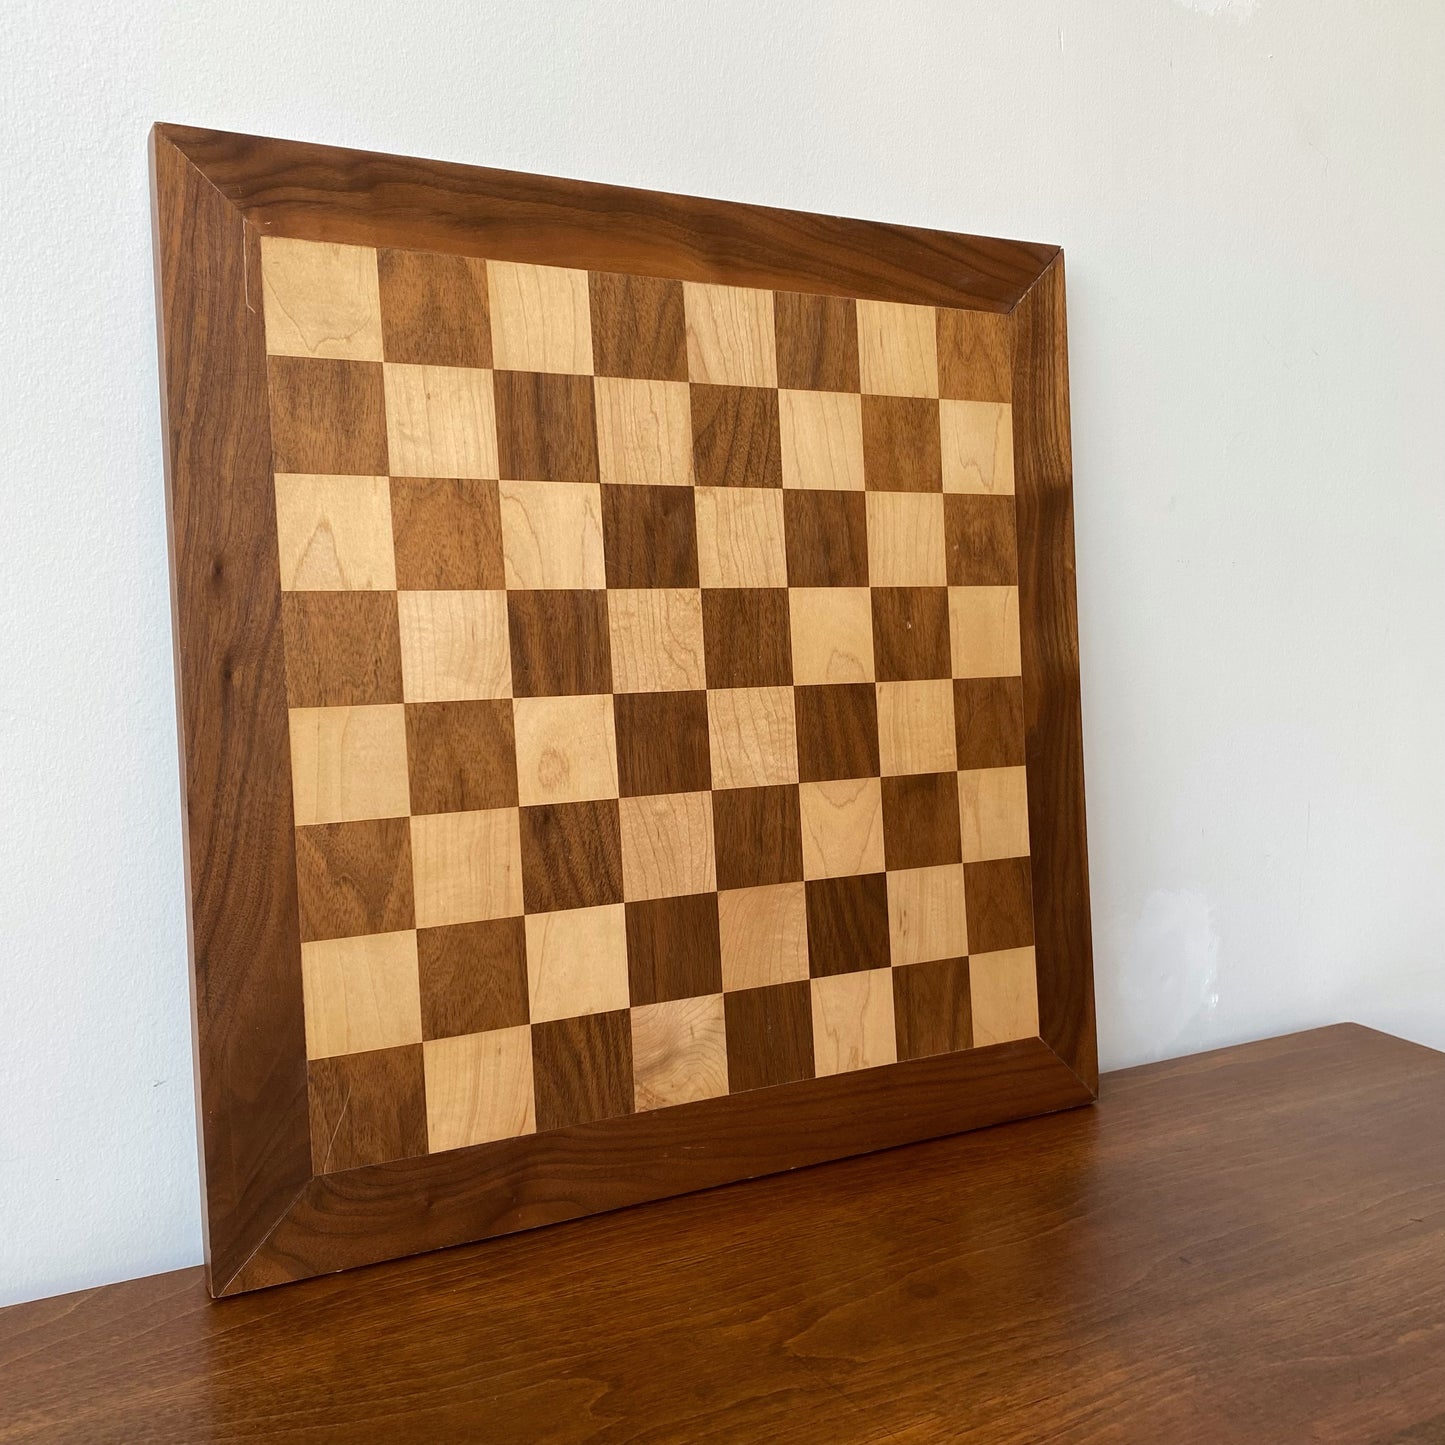 Vintage Wooden Chess Board (19.5” x 19.5”)